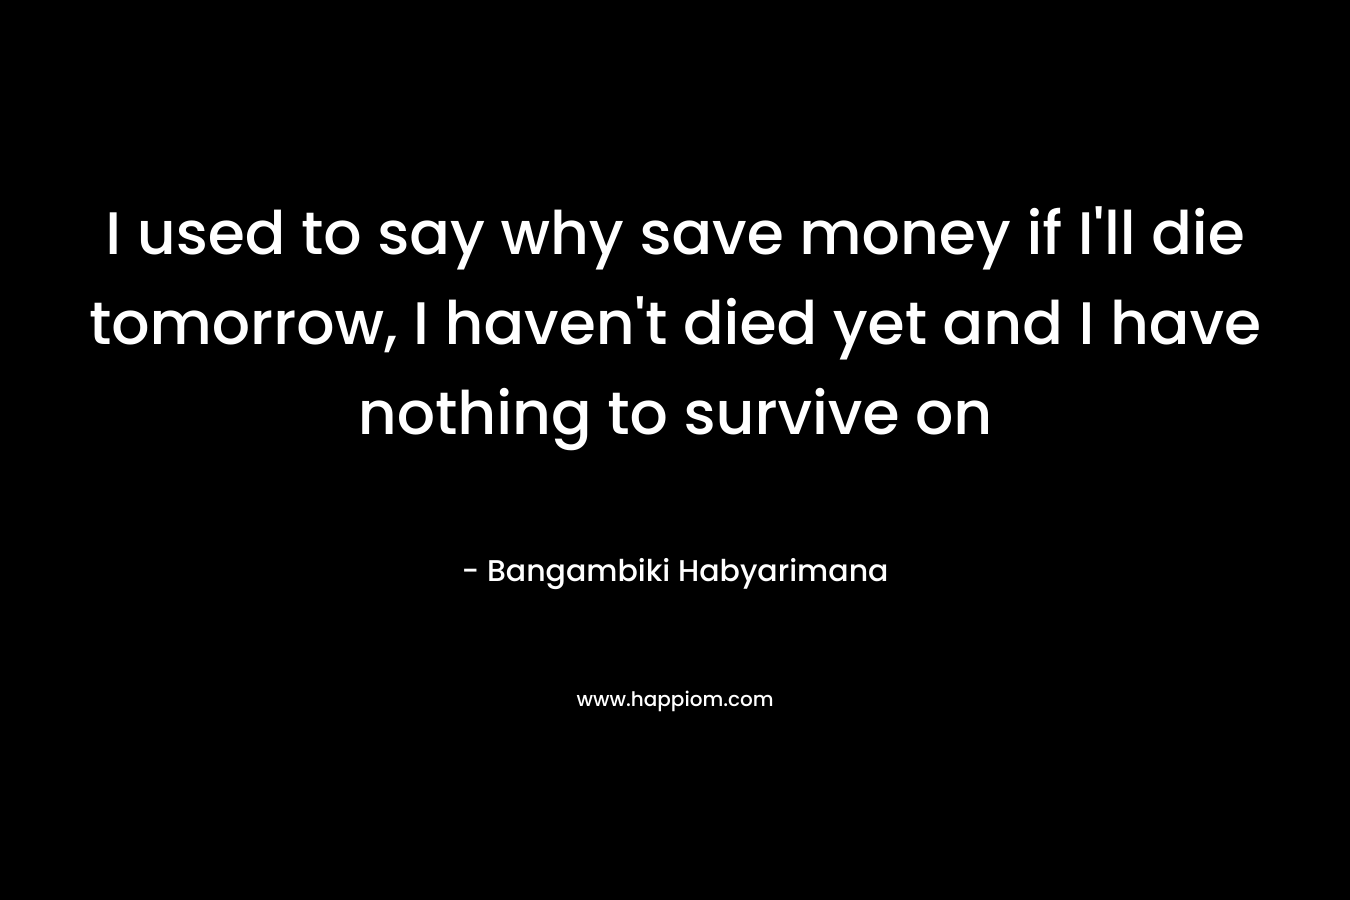 I used to say why save money if I'll die tomorrow, I haven't died yet and I have nothing to survive on